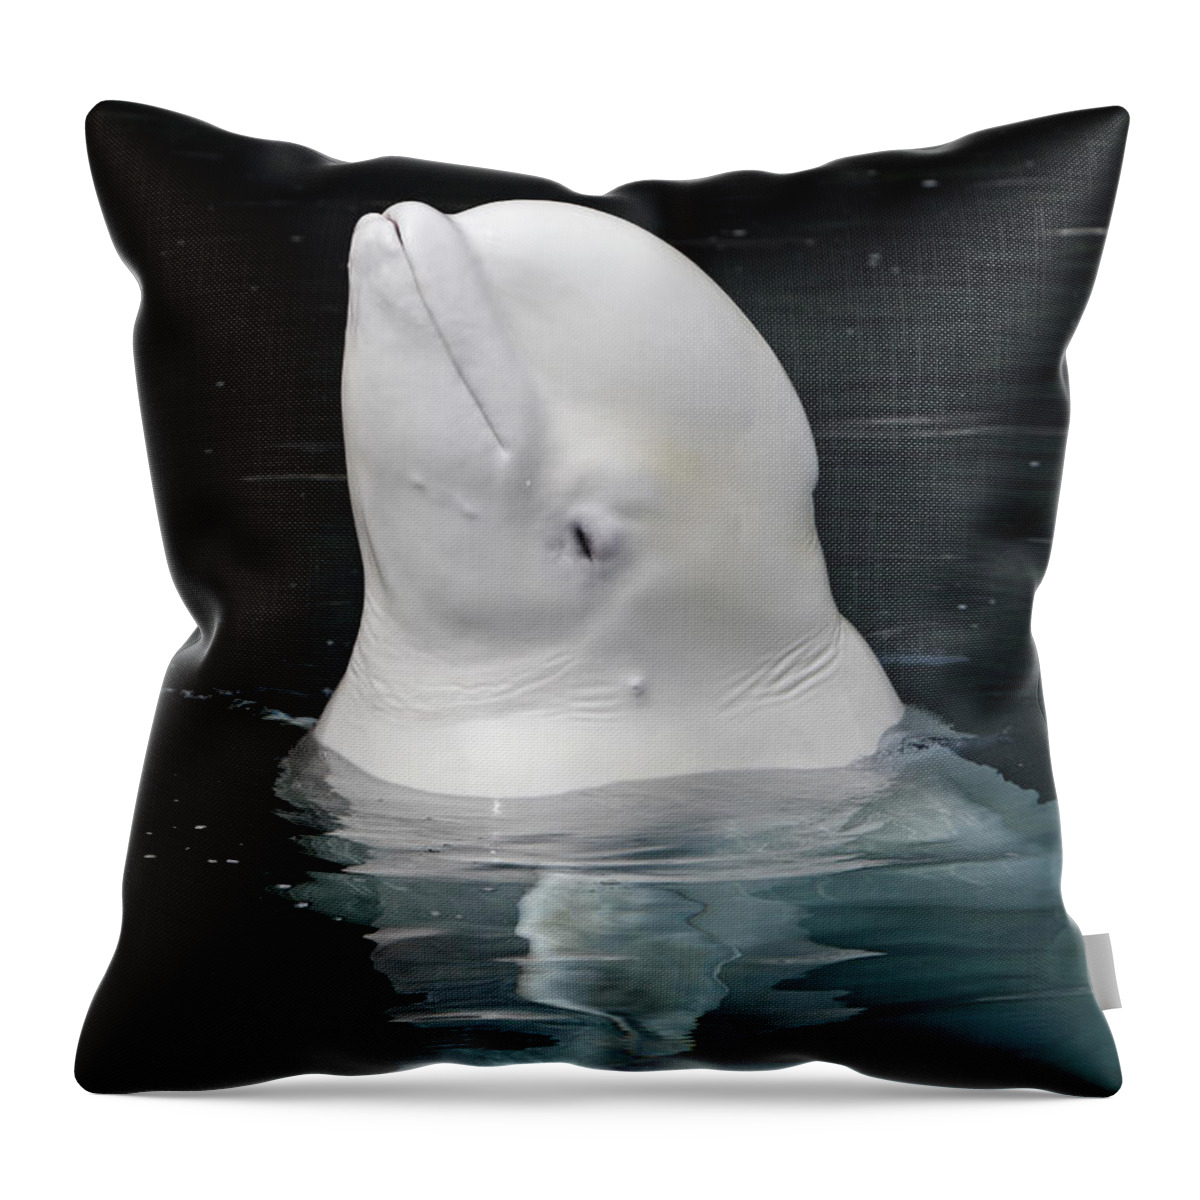 Standing Water Throw Pillow featuring the photograph Beluga by Sylvain Cordier